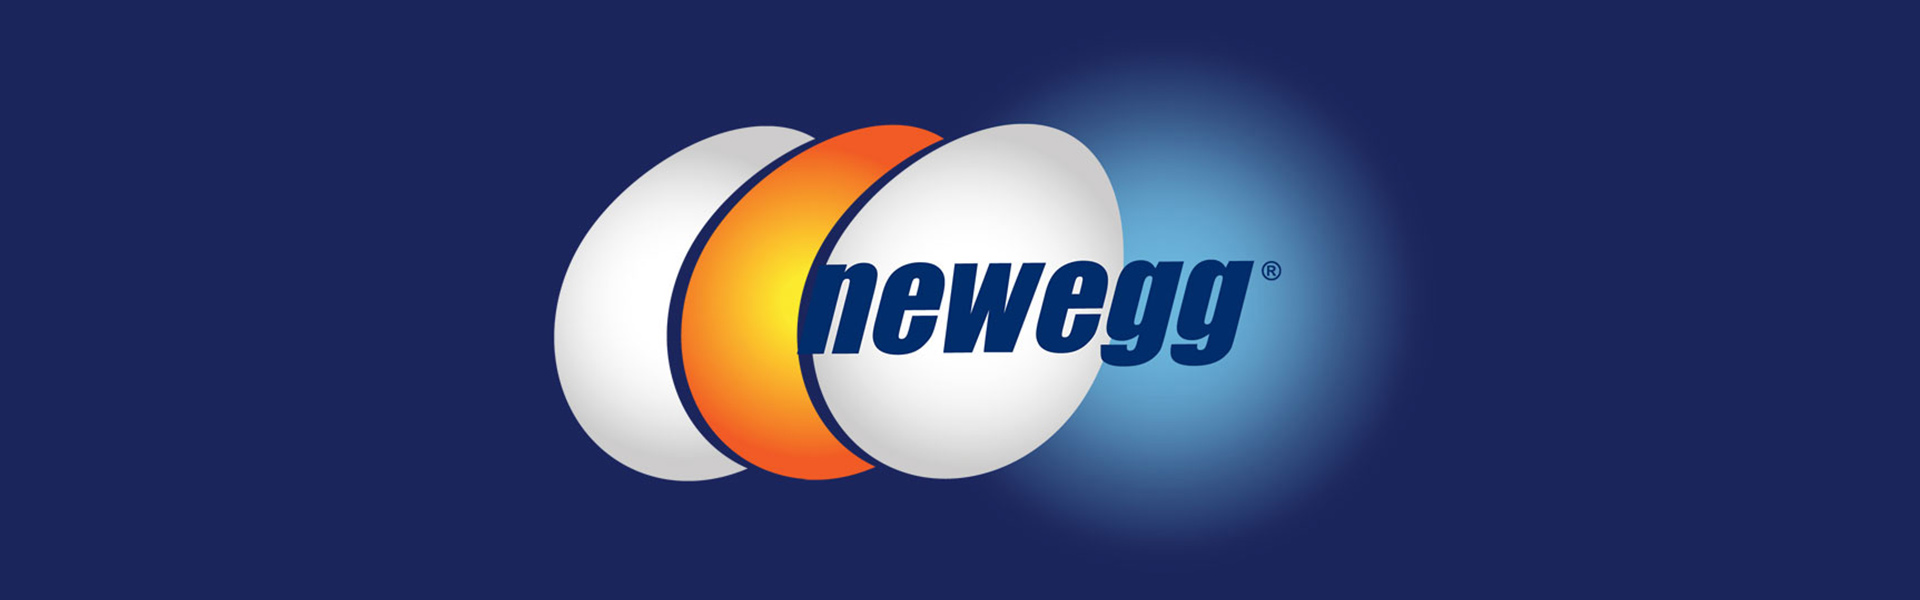 Newegg Announces First Half 2021 Financial Results